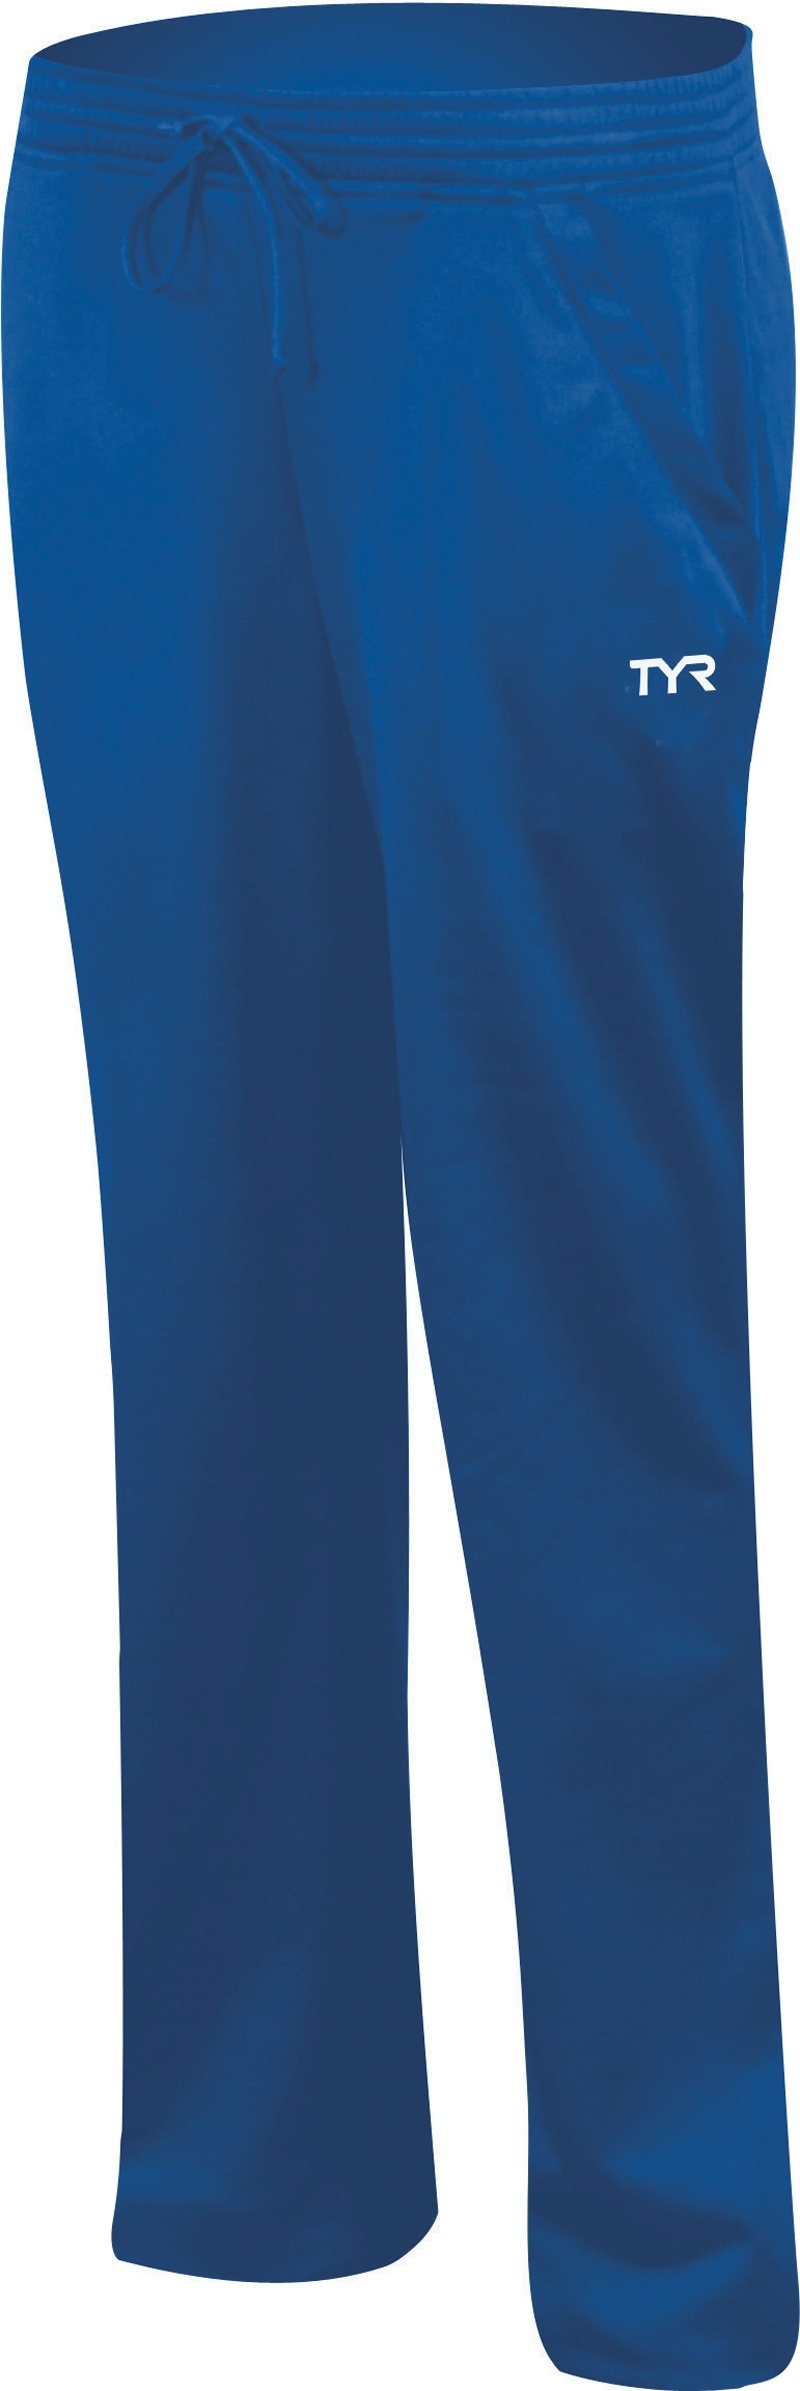 Tyr Women's Alliance Victory Warm Up Pants